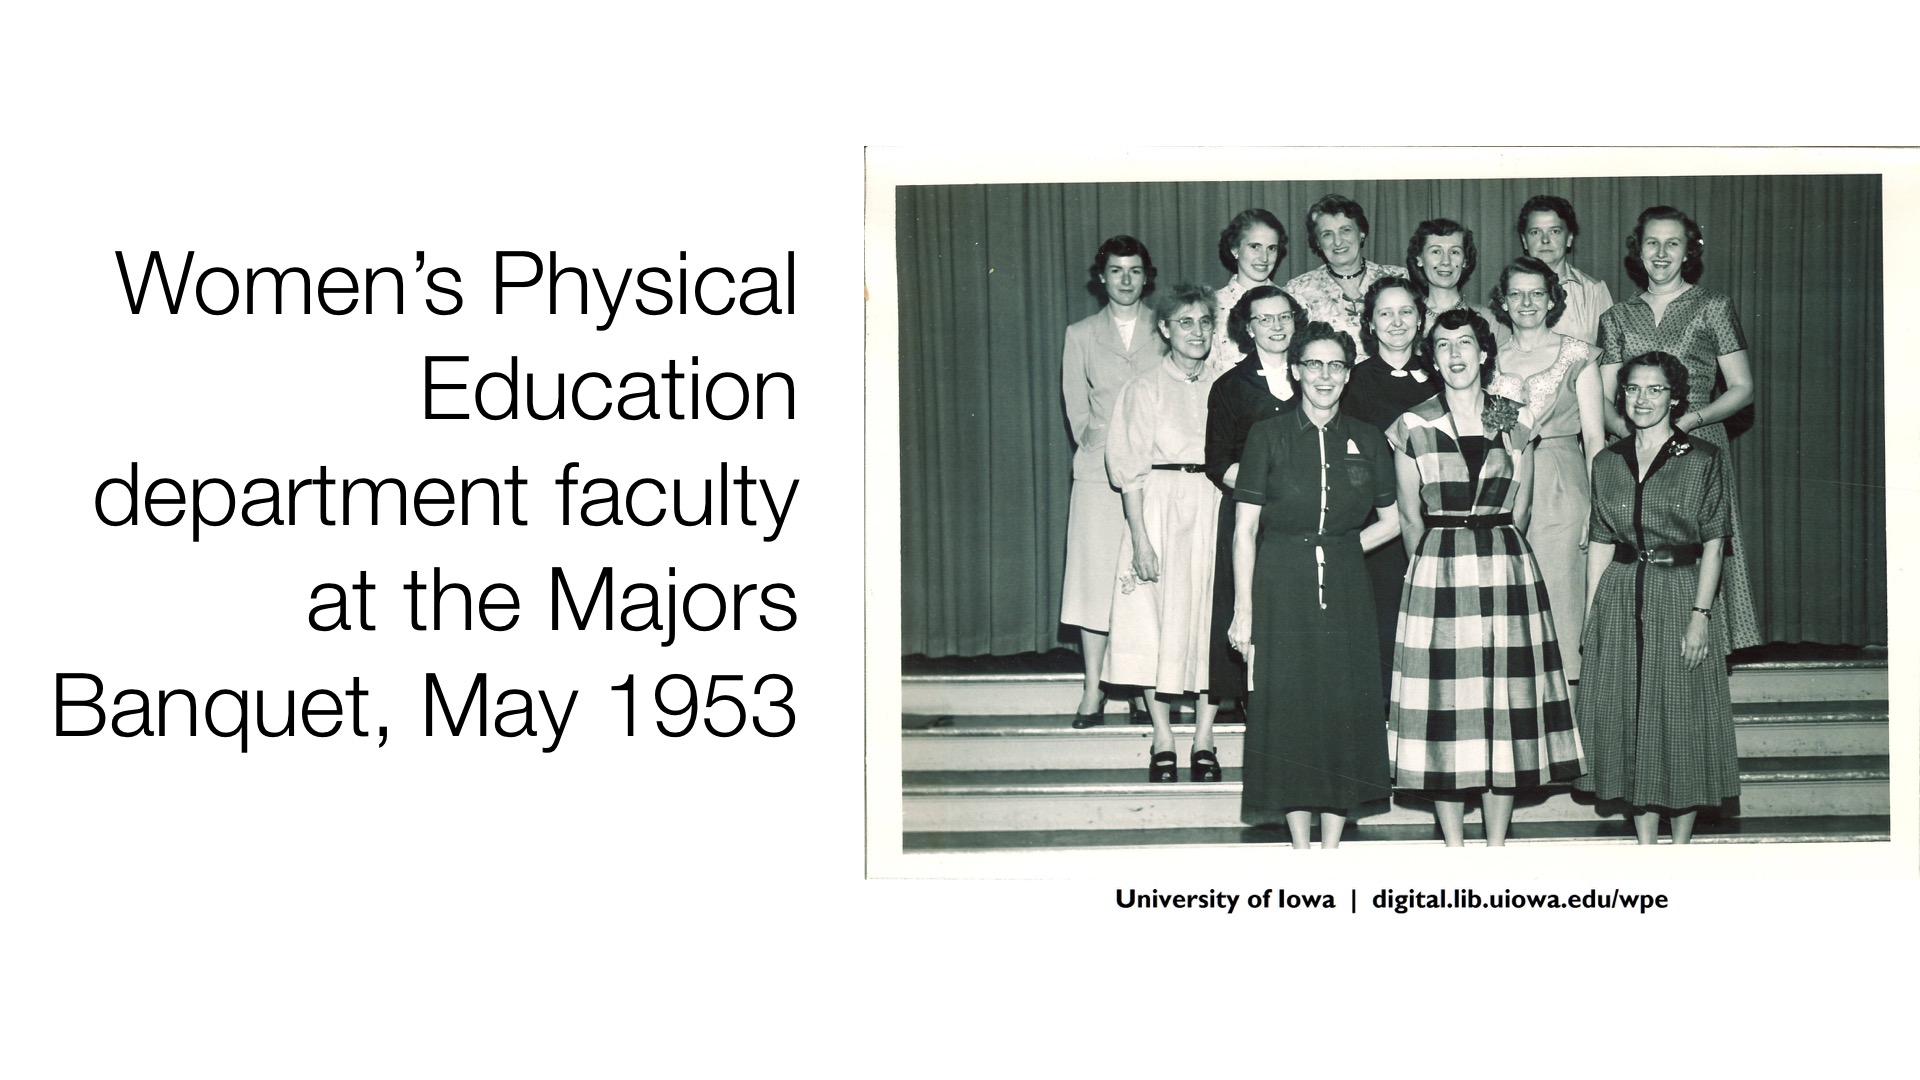 Women's Physical Education department faculty at the Majors Banquet, May 1953